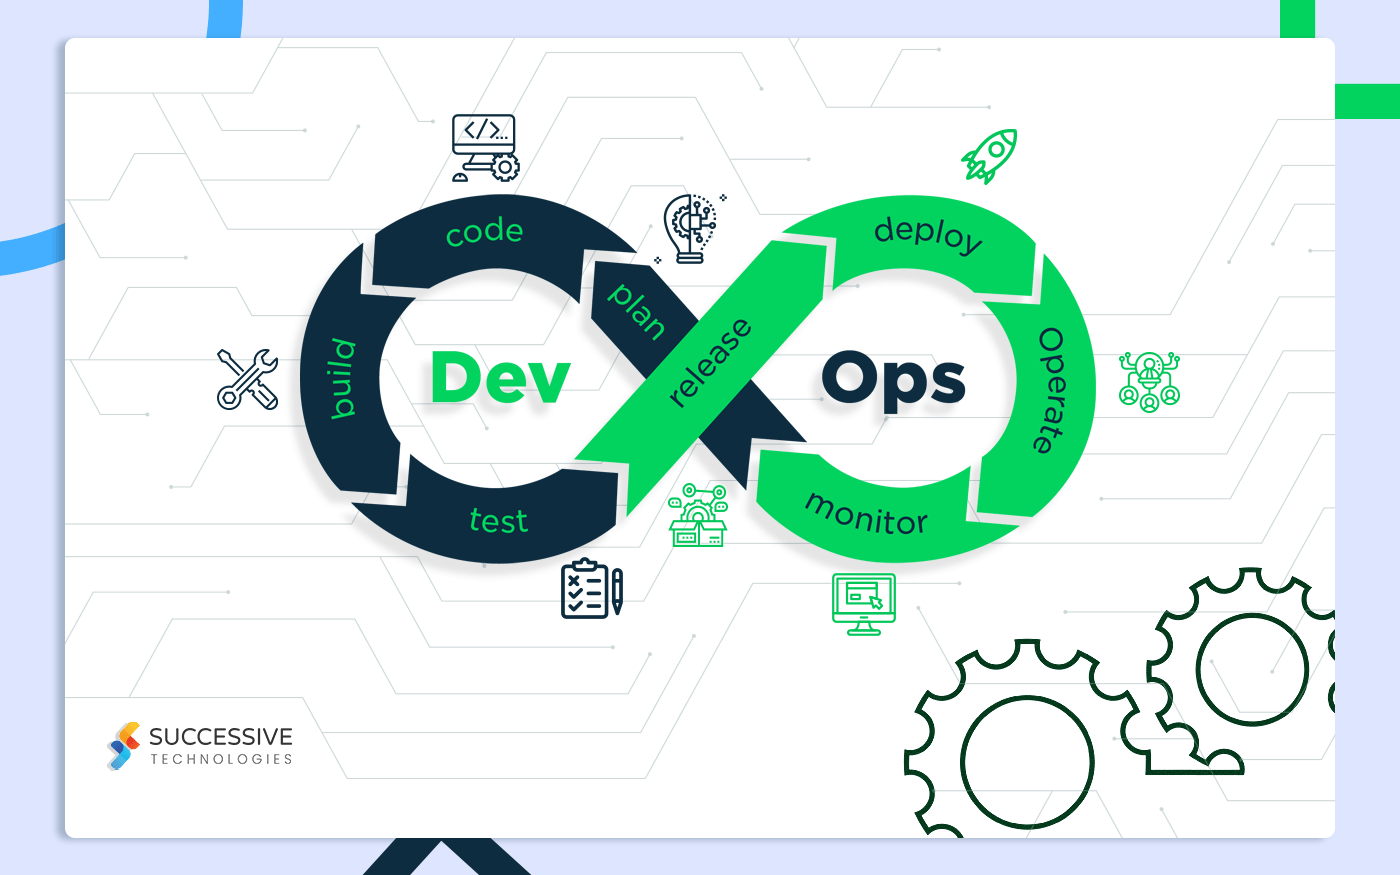 How DevOps Changed the Face of Application Development?